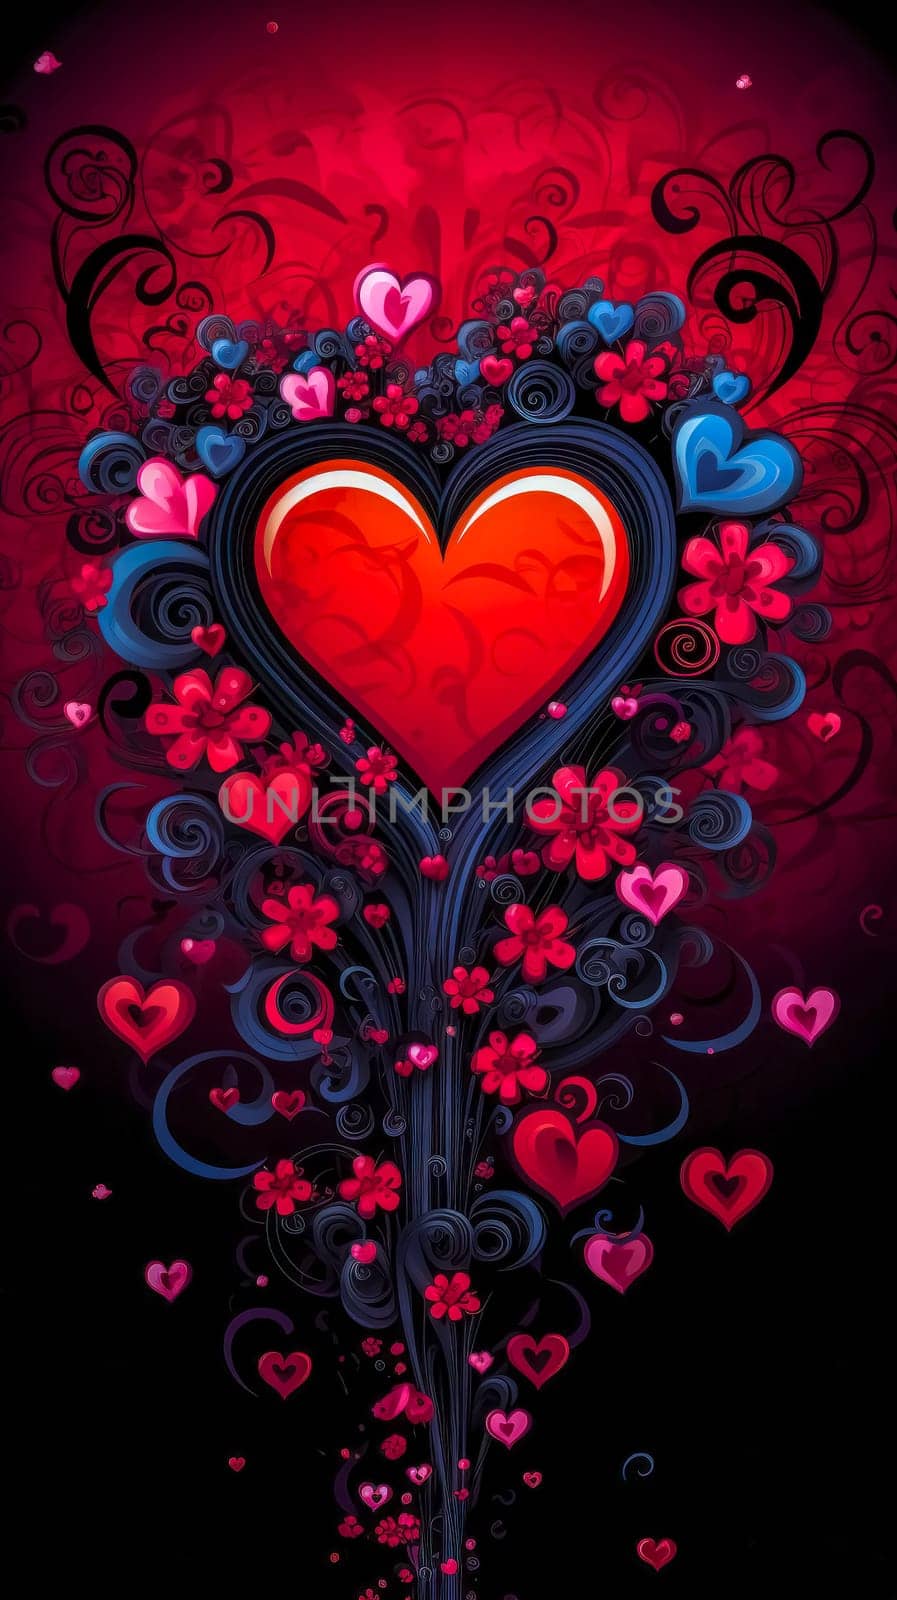 vivid artistic display featuring a central red heart surrounded by an array of smaller hearts and floral designs in shades of pink and blue, set against a dark backdrop. by Edophoto